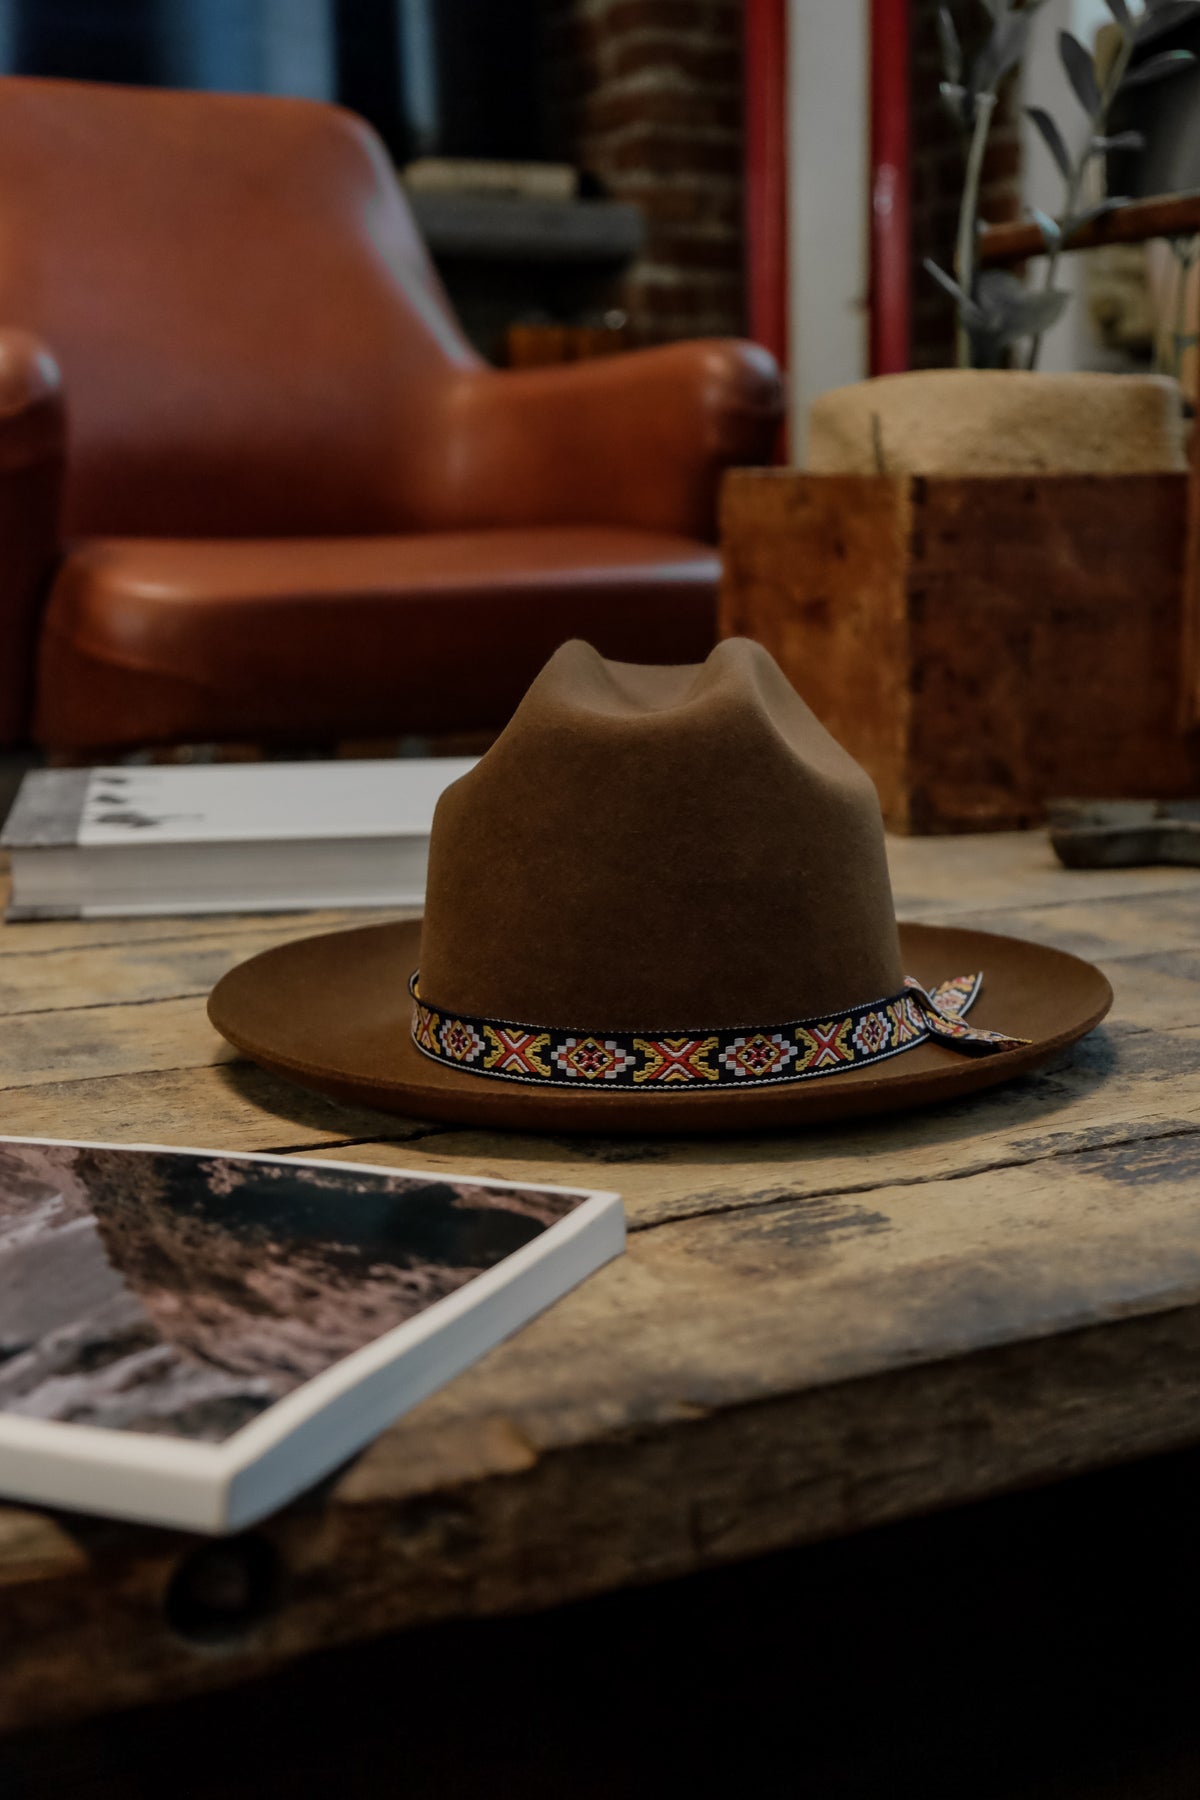 The Rugged Society - Open Road Hat in Tuscan Earth Color - Handmade to order